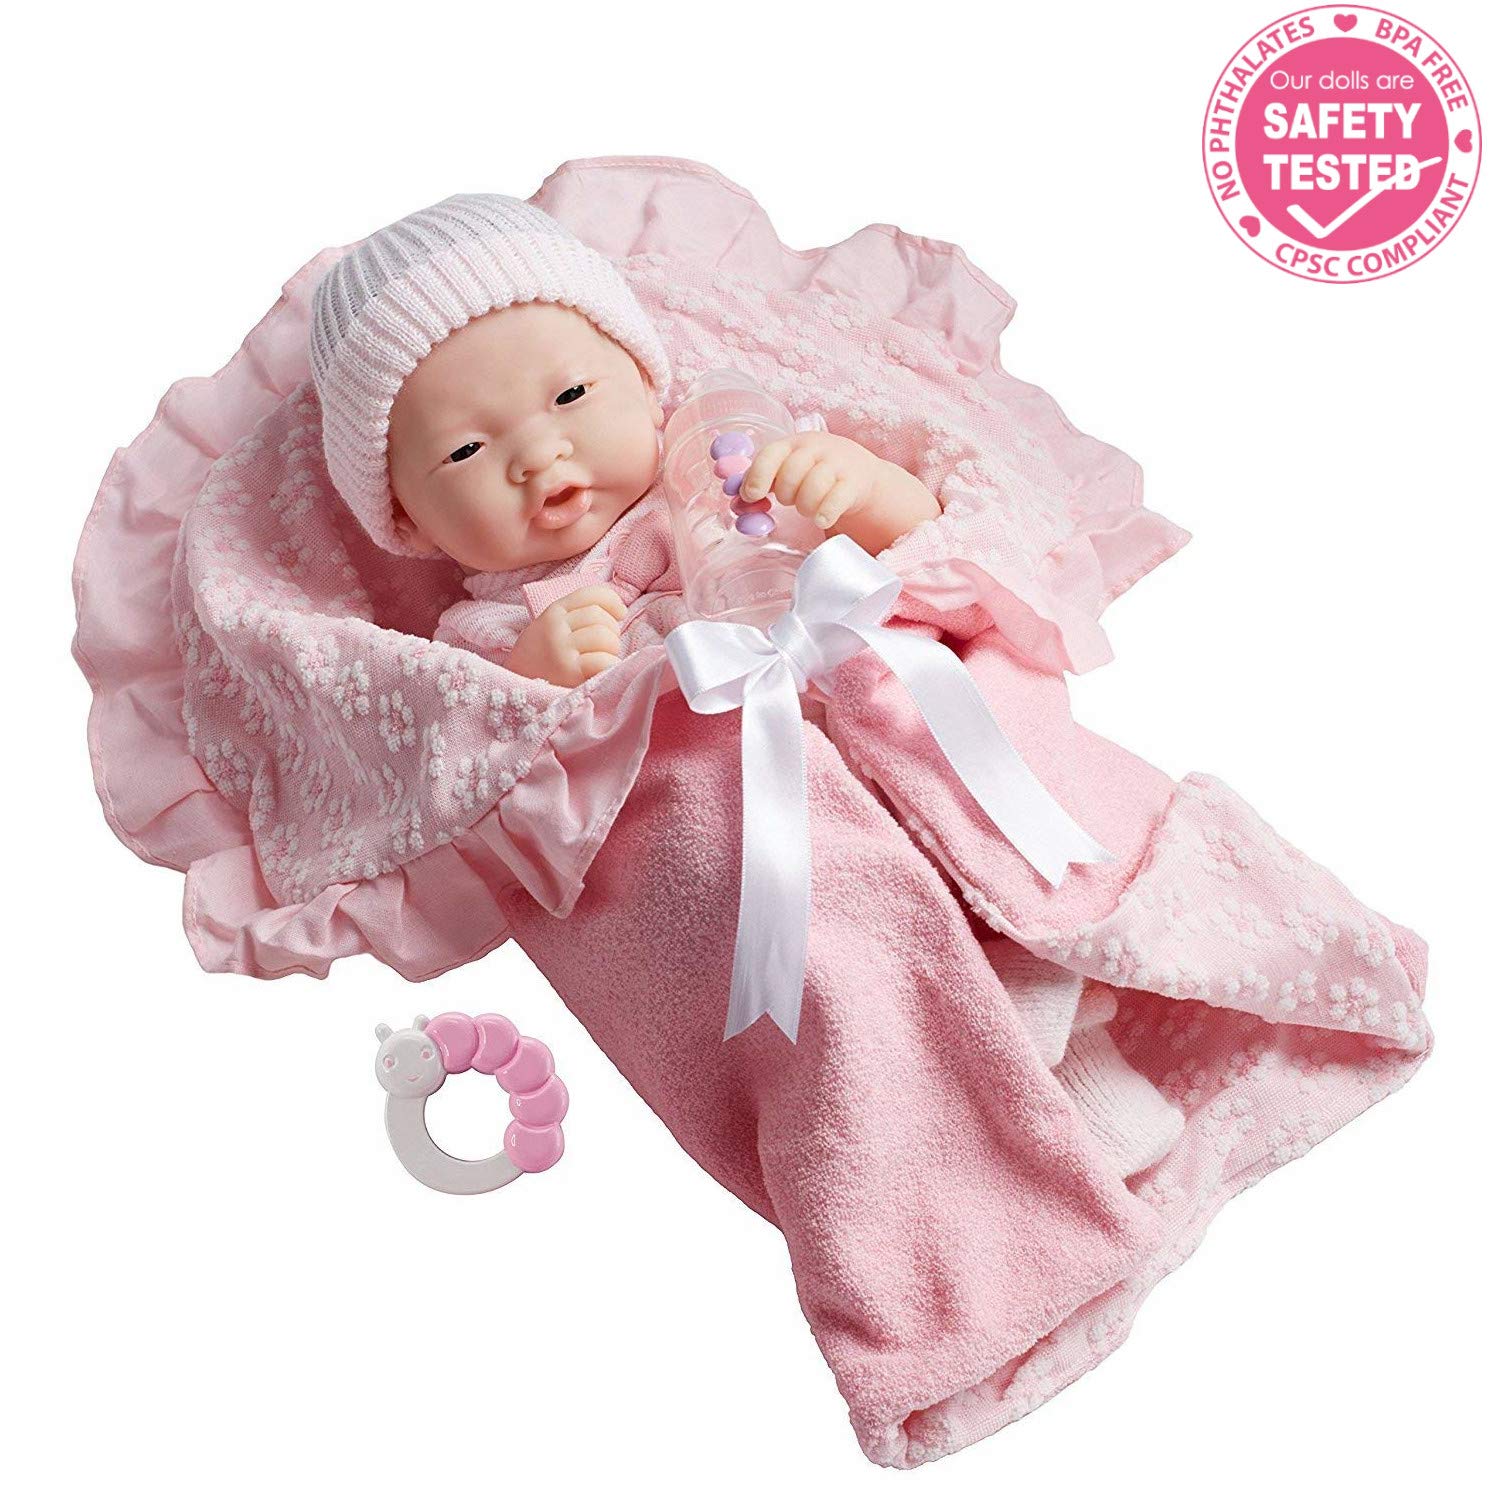 JC Toys Soft Body La Newborn in Bunting and Accessories. Asian., Pink (18784)